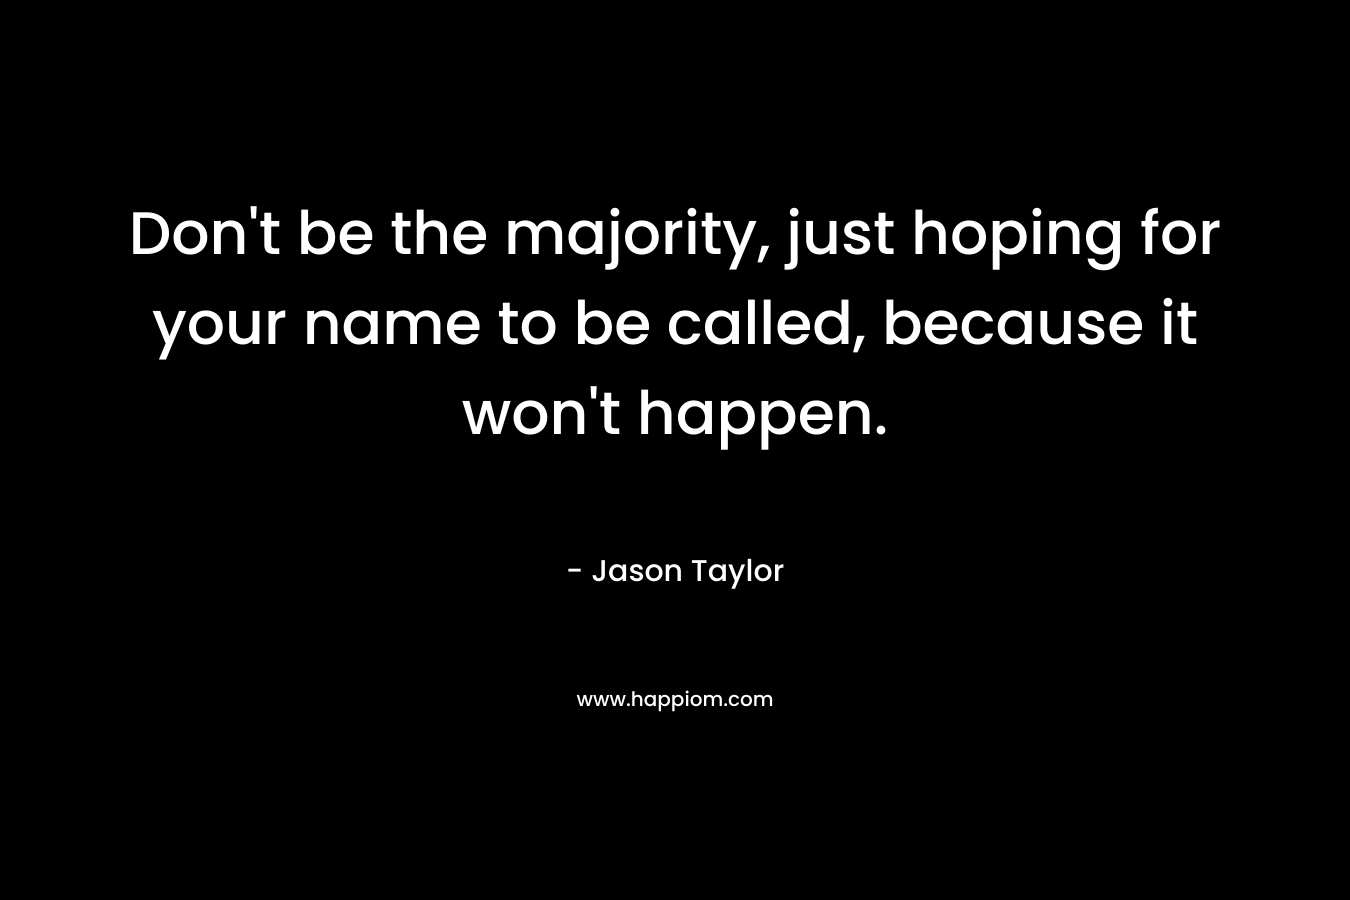 Don't be the majority, just hoping for your name to be called, because it won't happen.